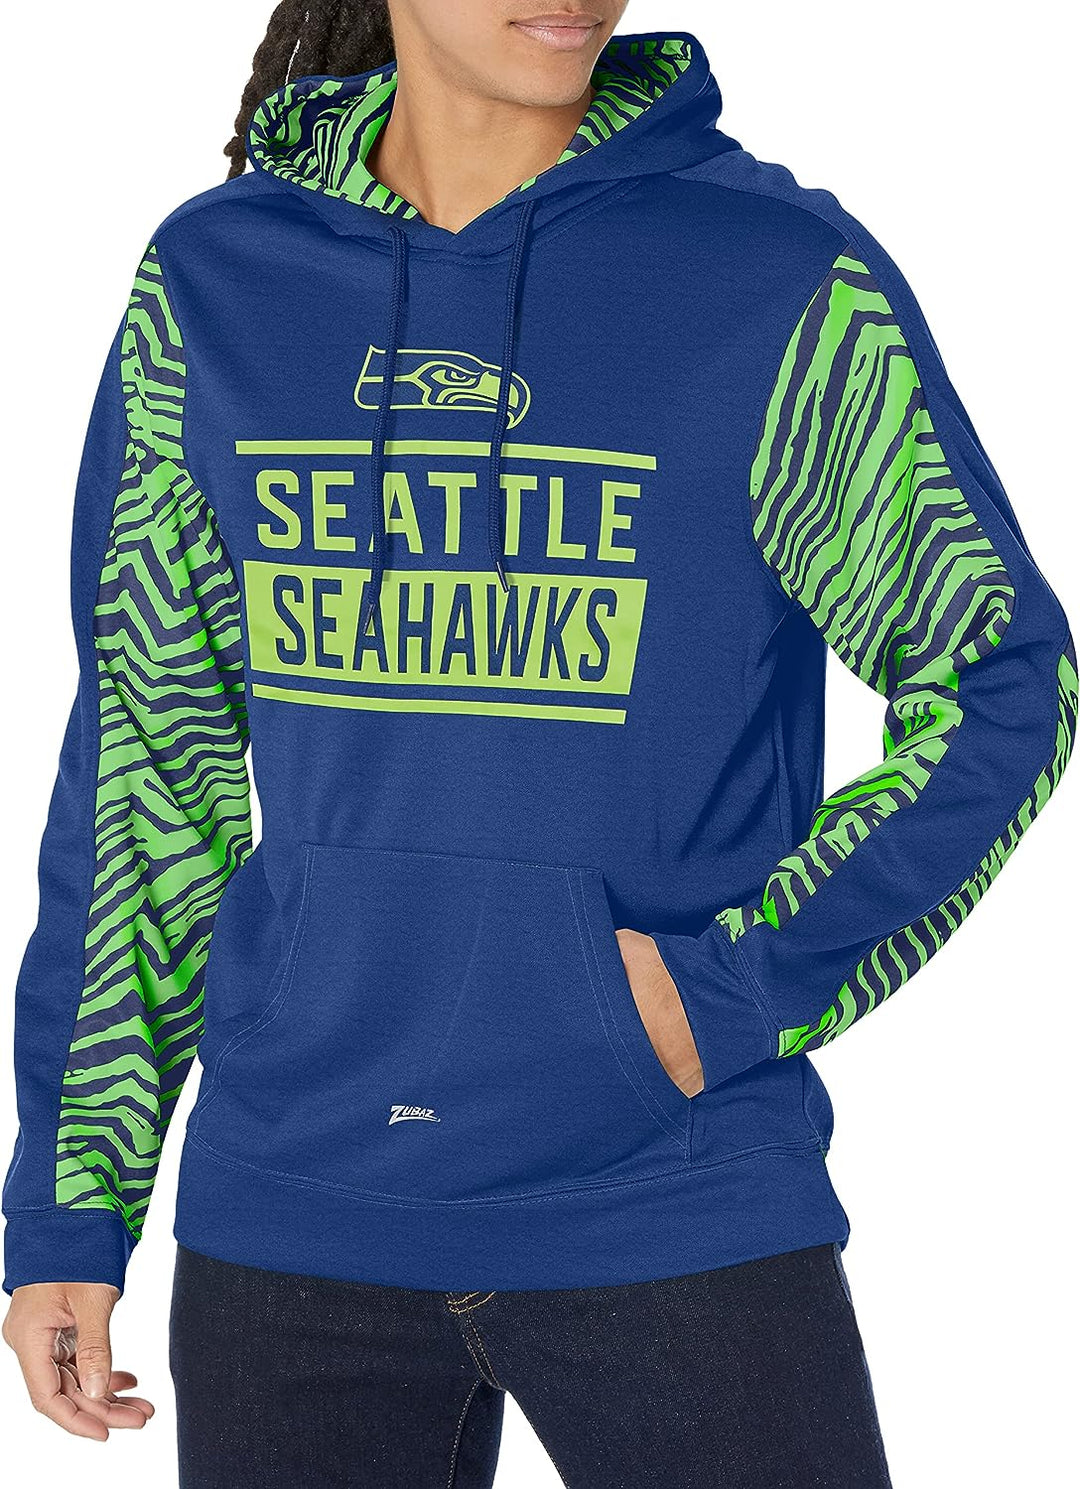 Zubaz NFL Men's Seattle Seahawks Team Color with Zebra Accents Pullover Hoodie